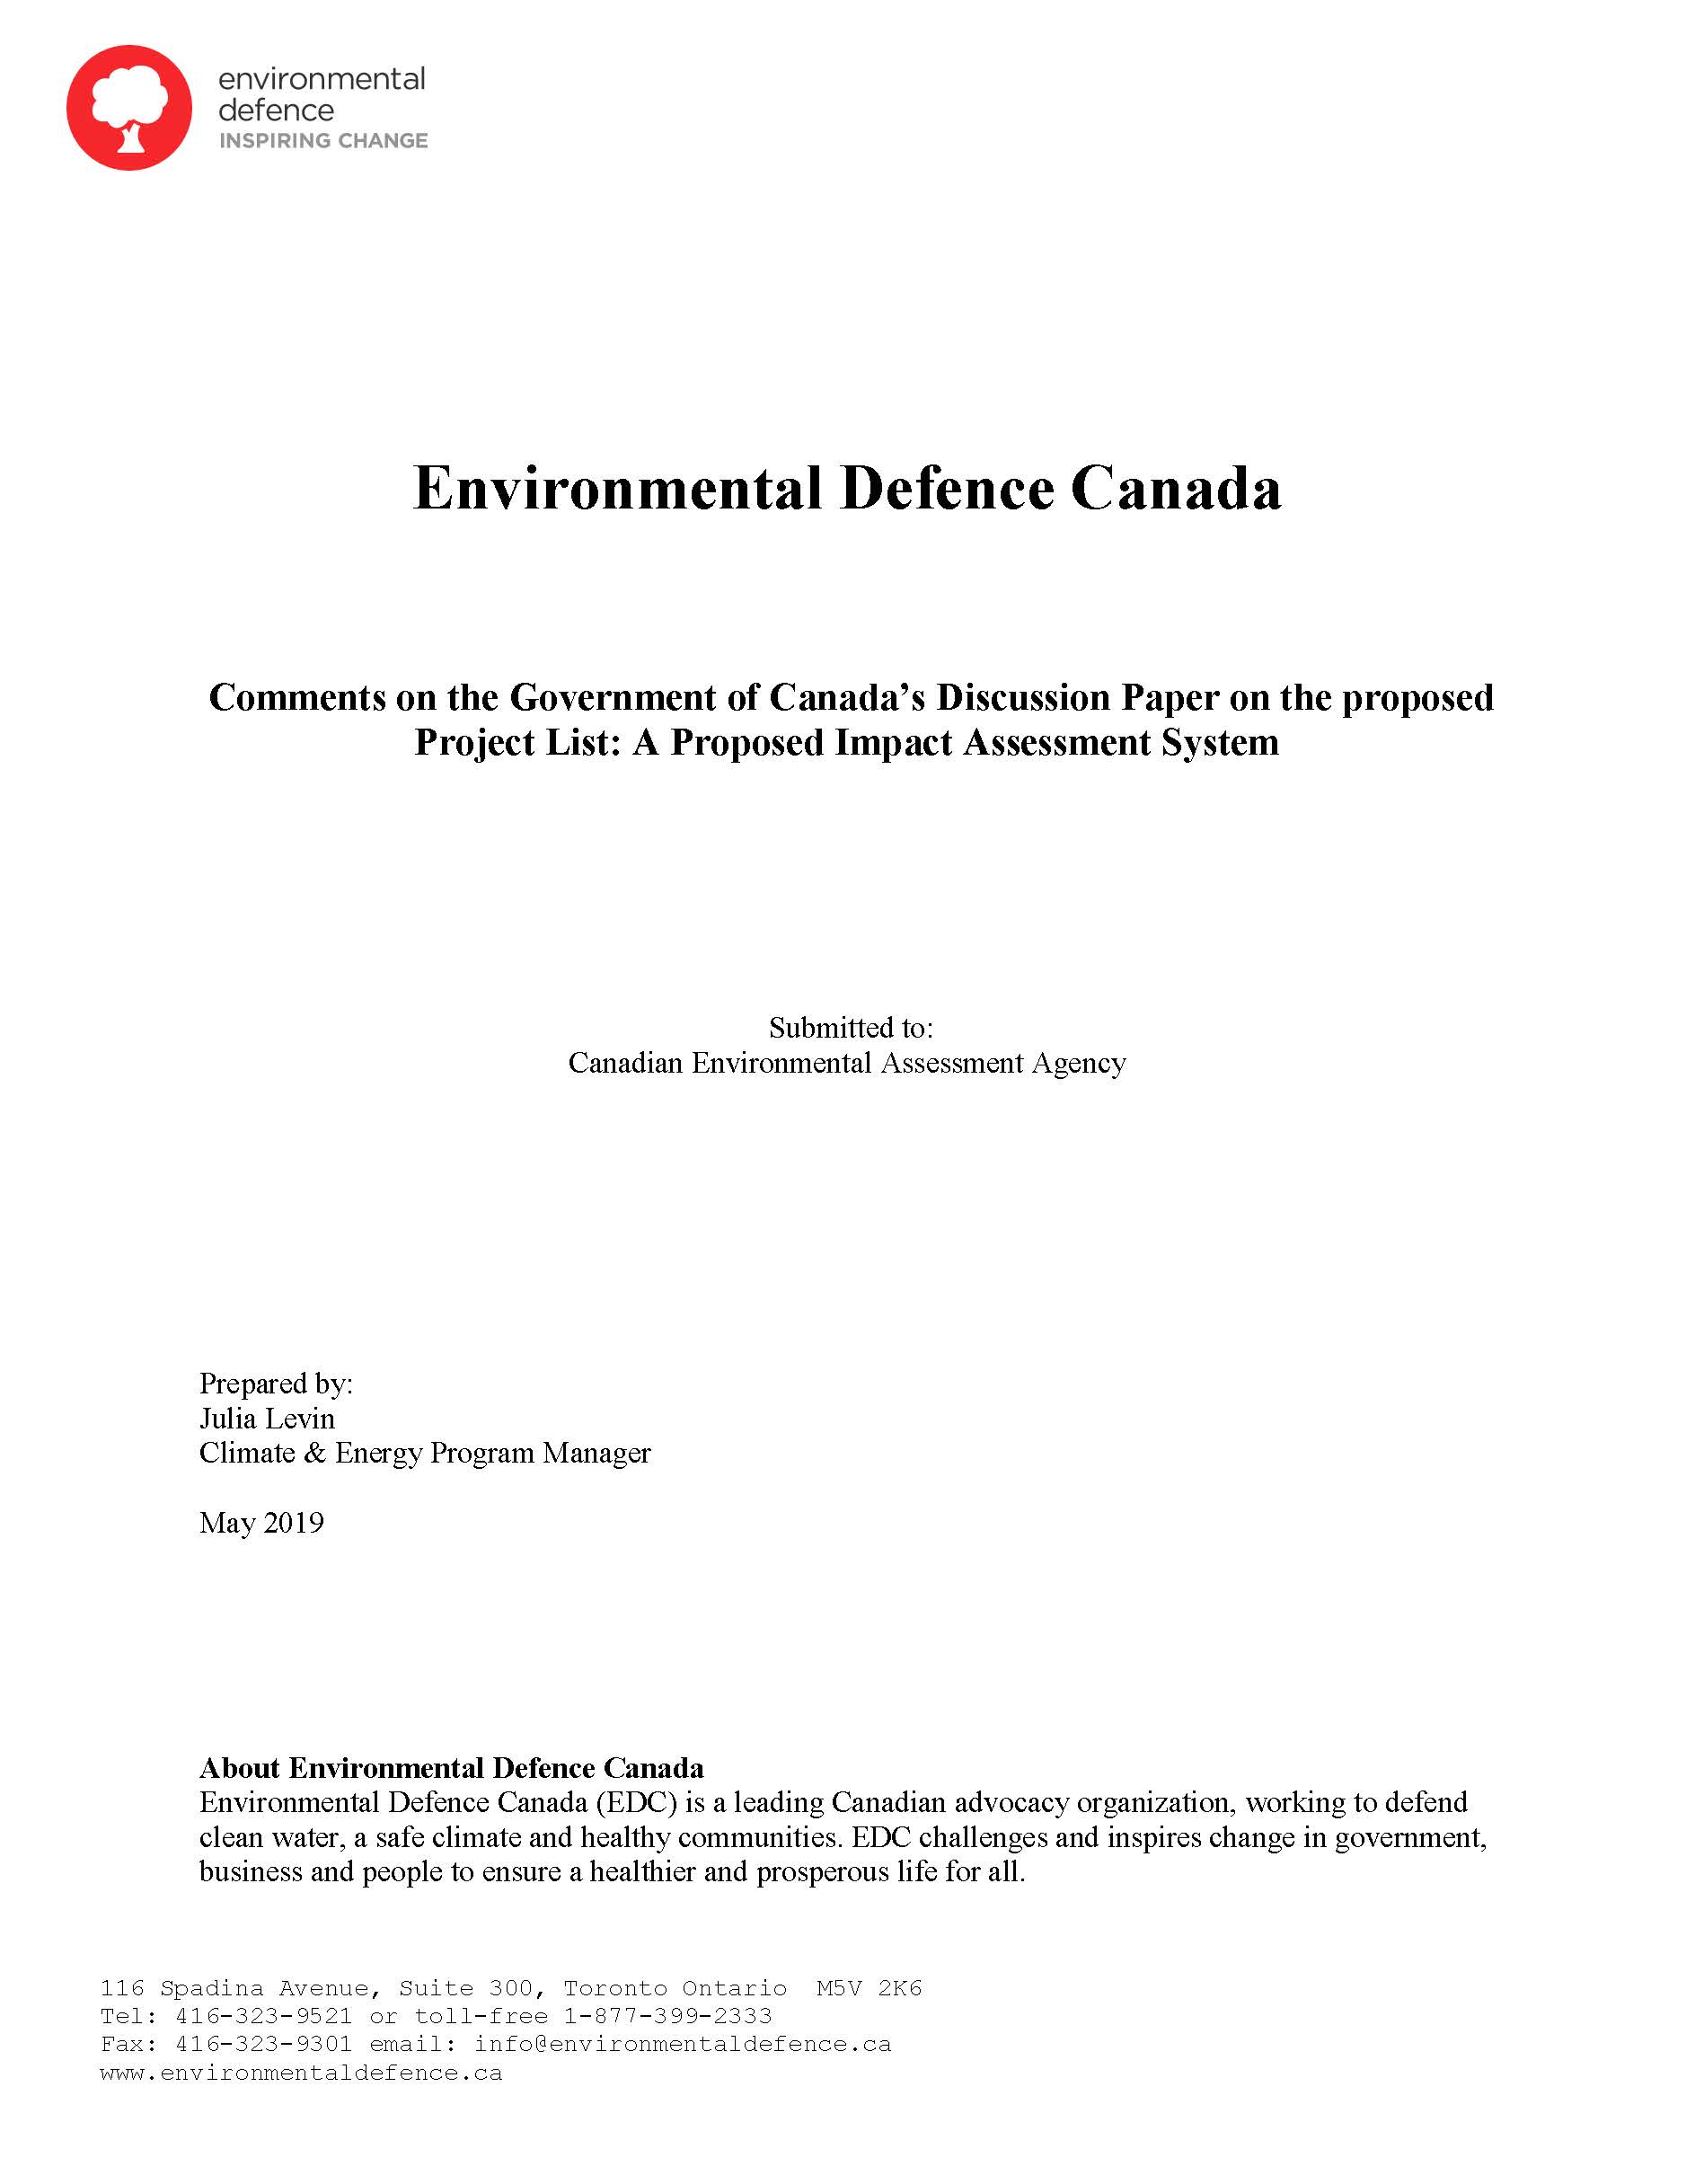 The cover of Environmental Defence's submission to the Canadian Environmental Assessment Agency on the Project List of Bill C-69